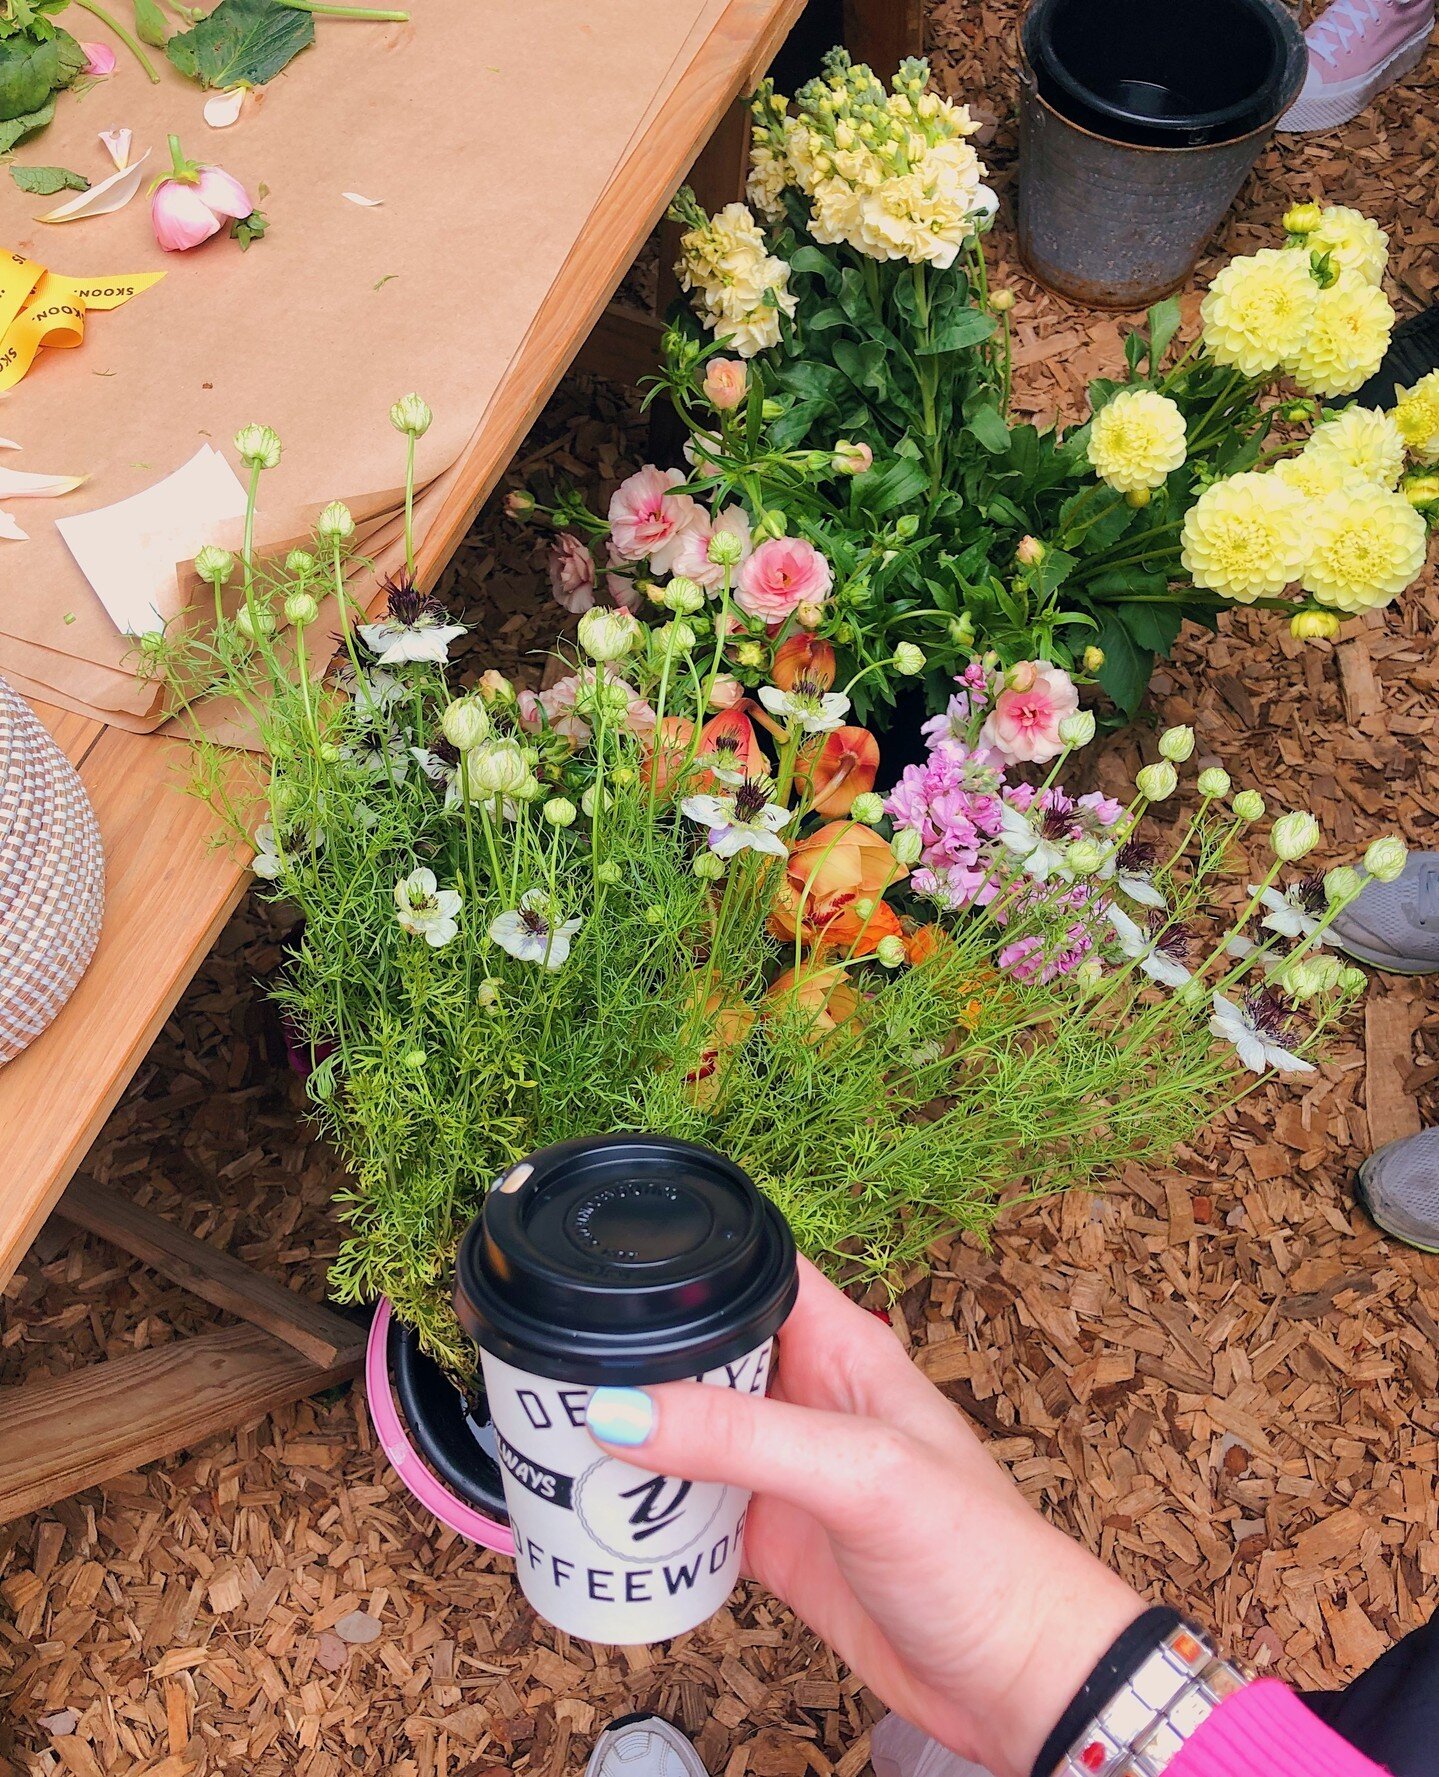 Freshly brewed coffee and freshly cut blooms to start off the weekend. Actually, every day should start this way.✨